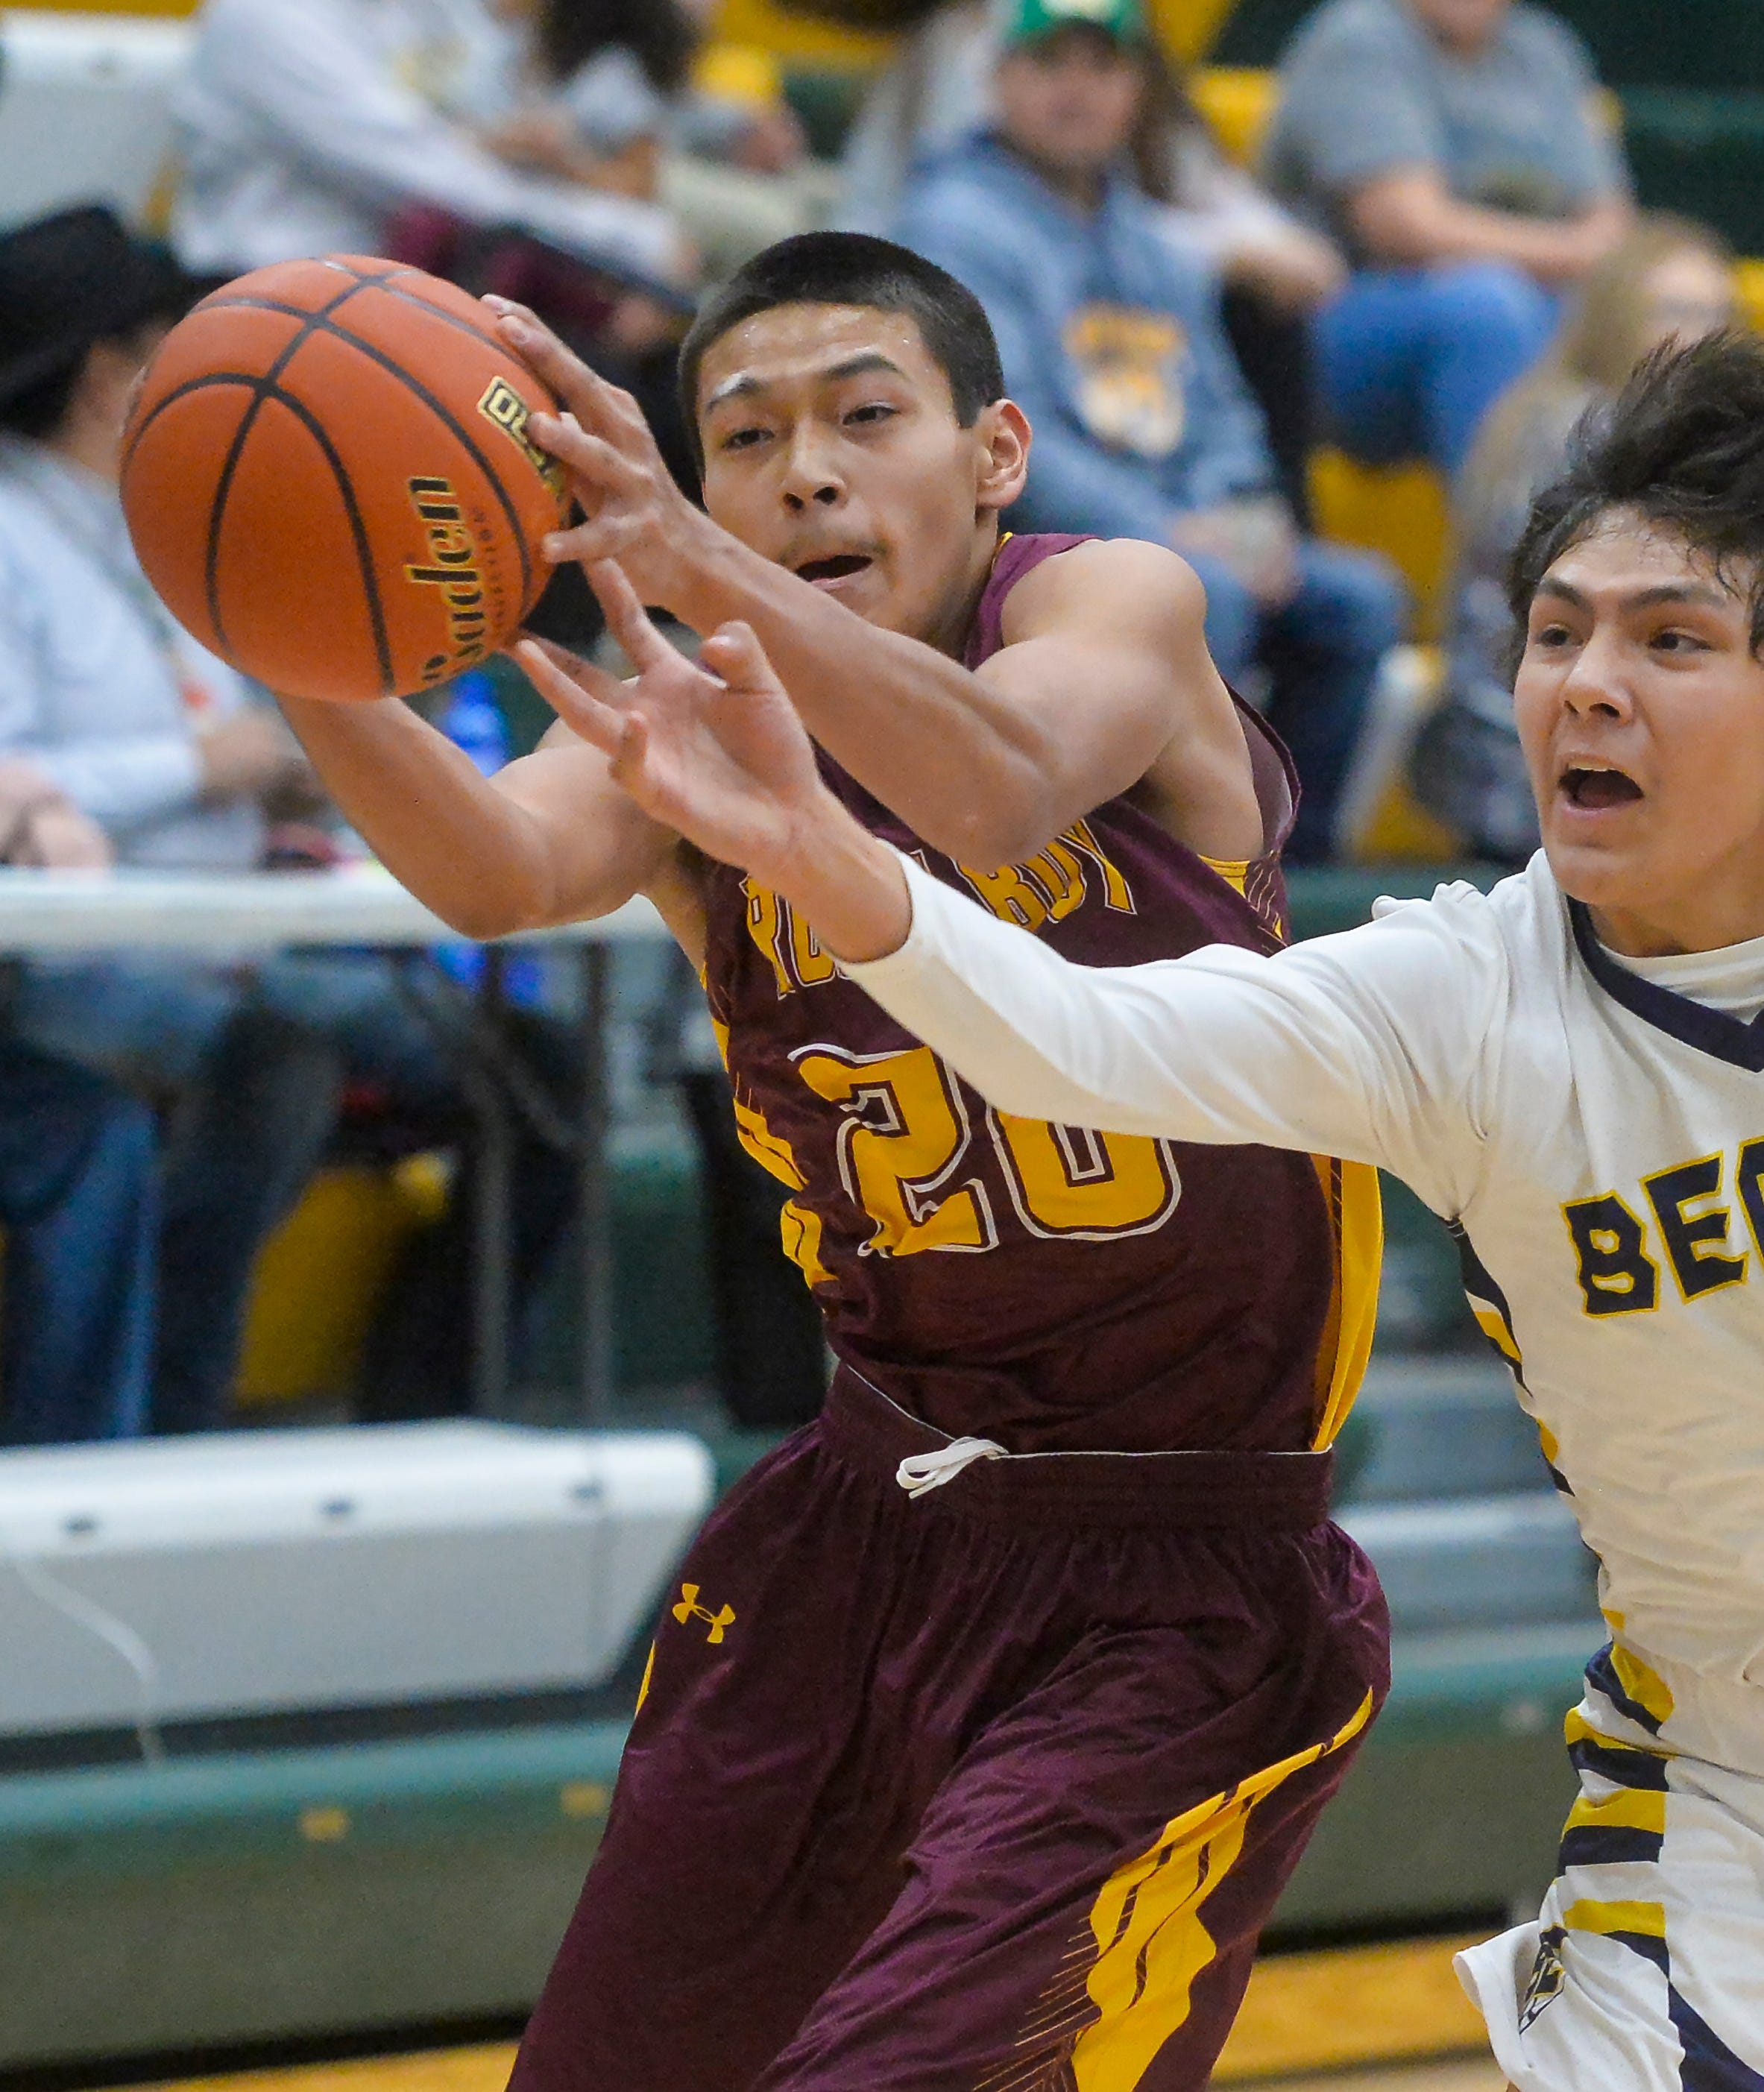 While Rocky Boy basketball teams don't rely on rez ball, short for "reservation ball," the fast-paced strategy is celebrated as a quintessential style among Native teams.